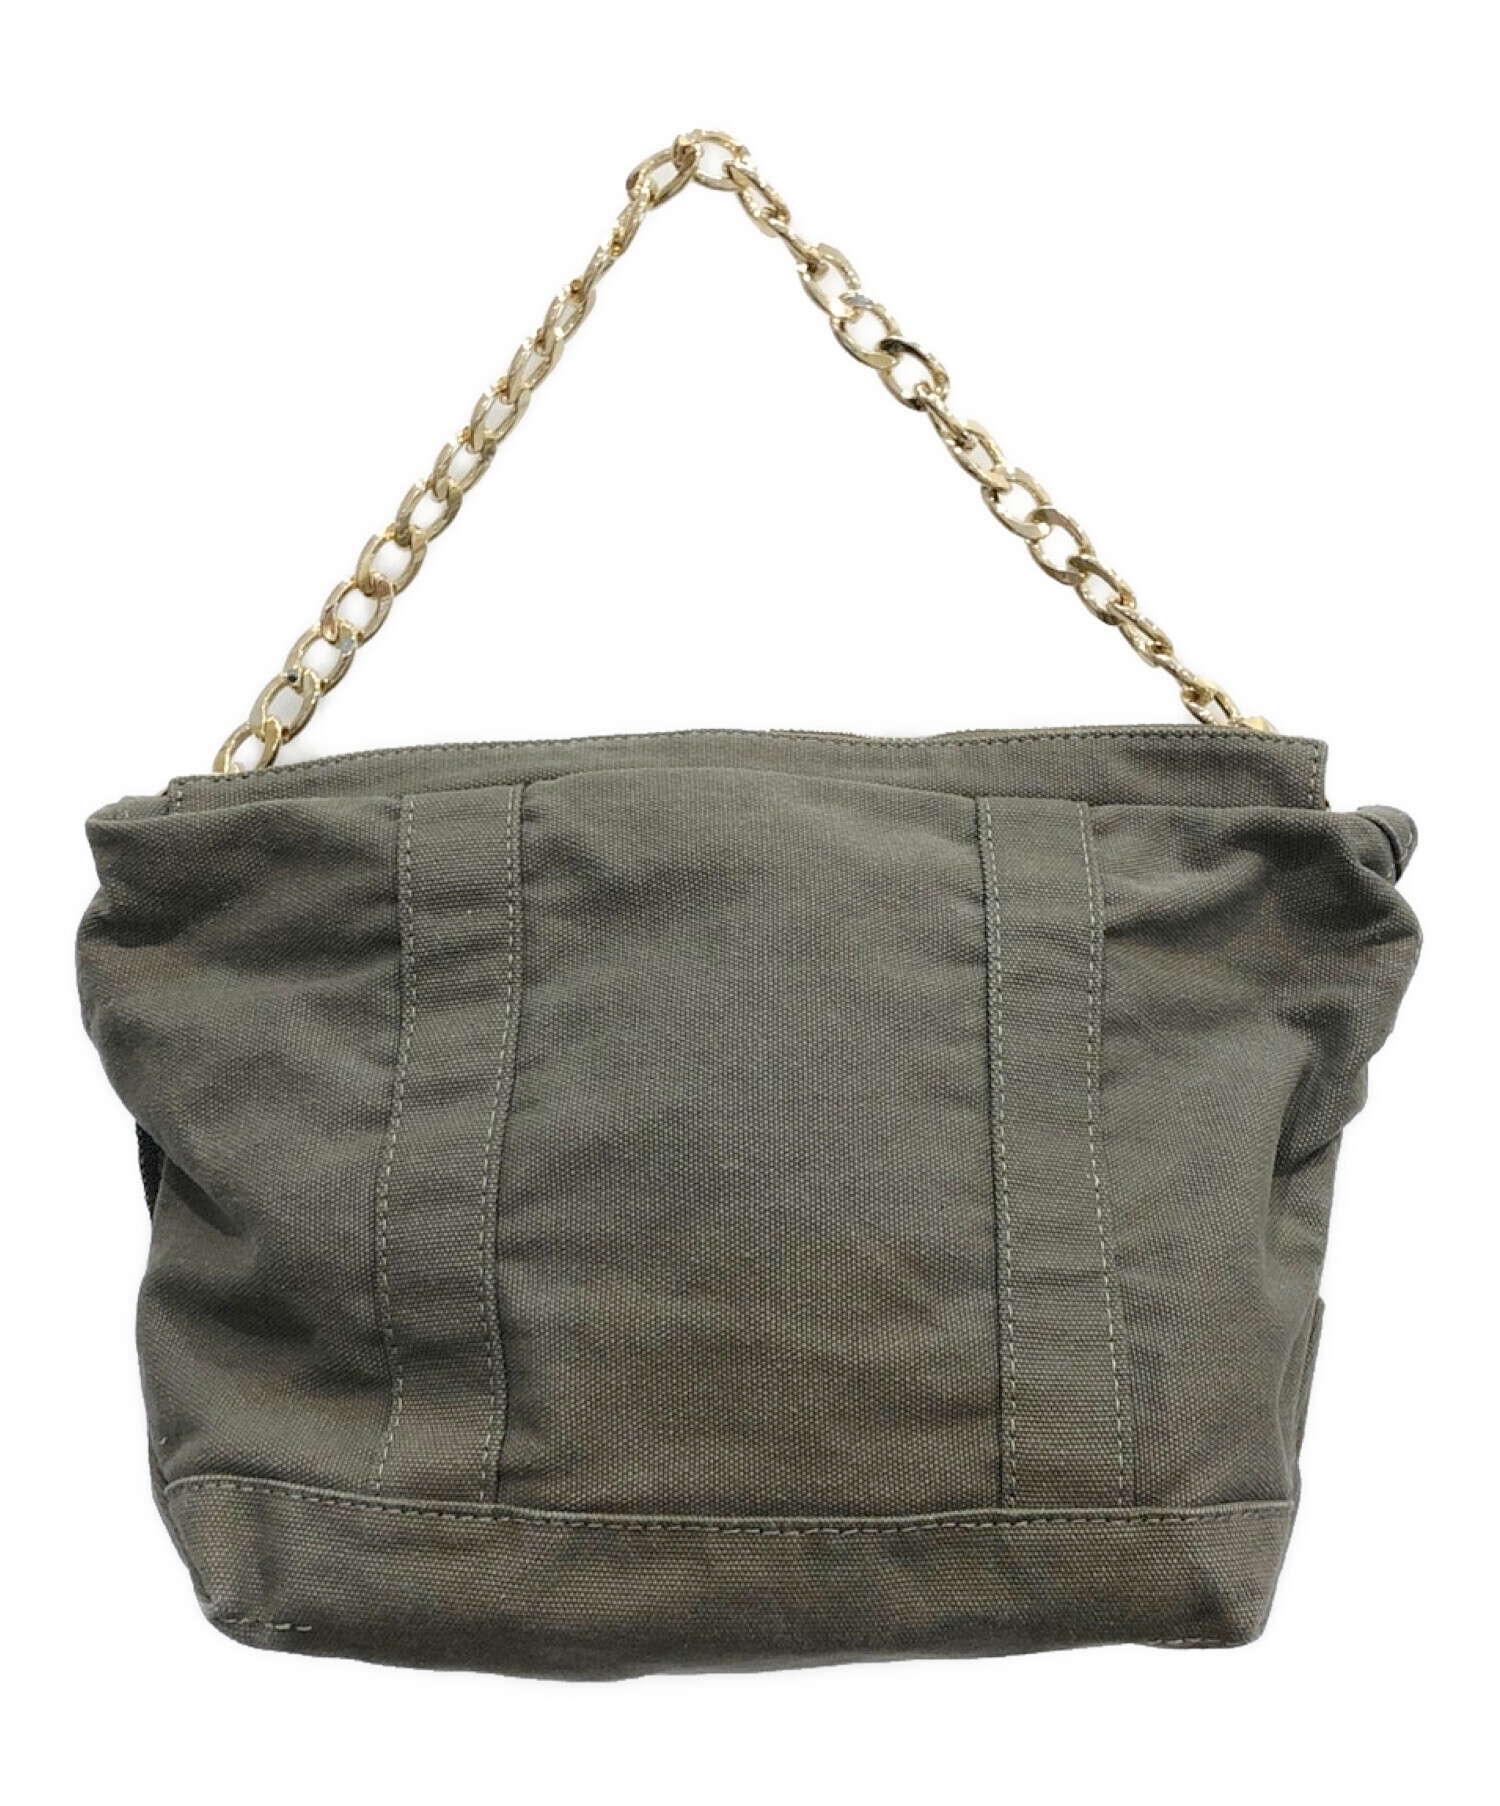 GOOD GRIEF Canvas Cluch Bag（L）カーキ - ショルダーバッグ